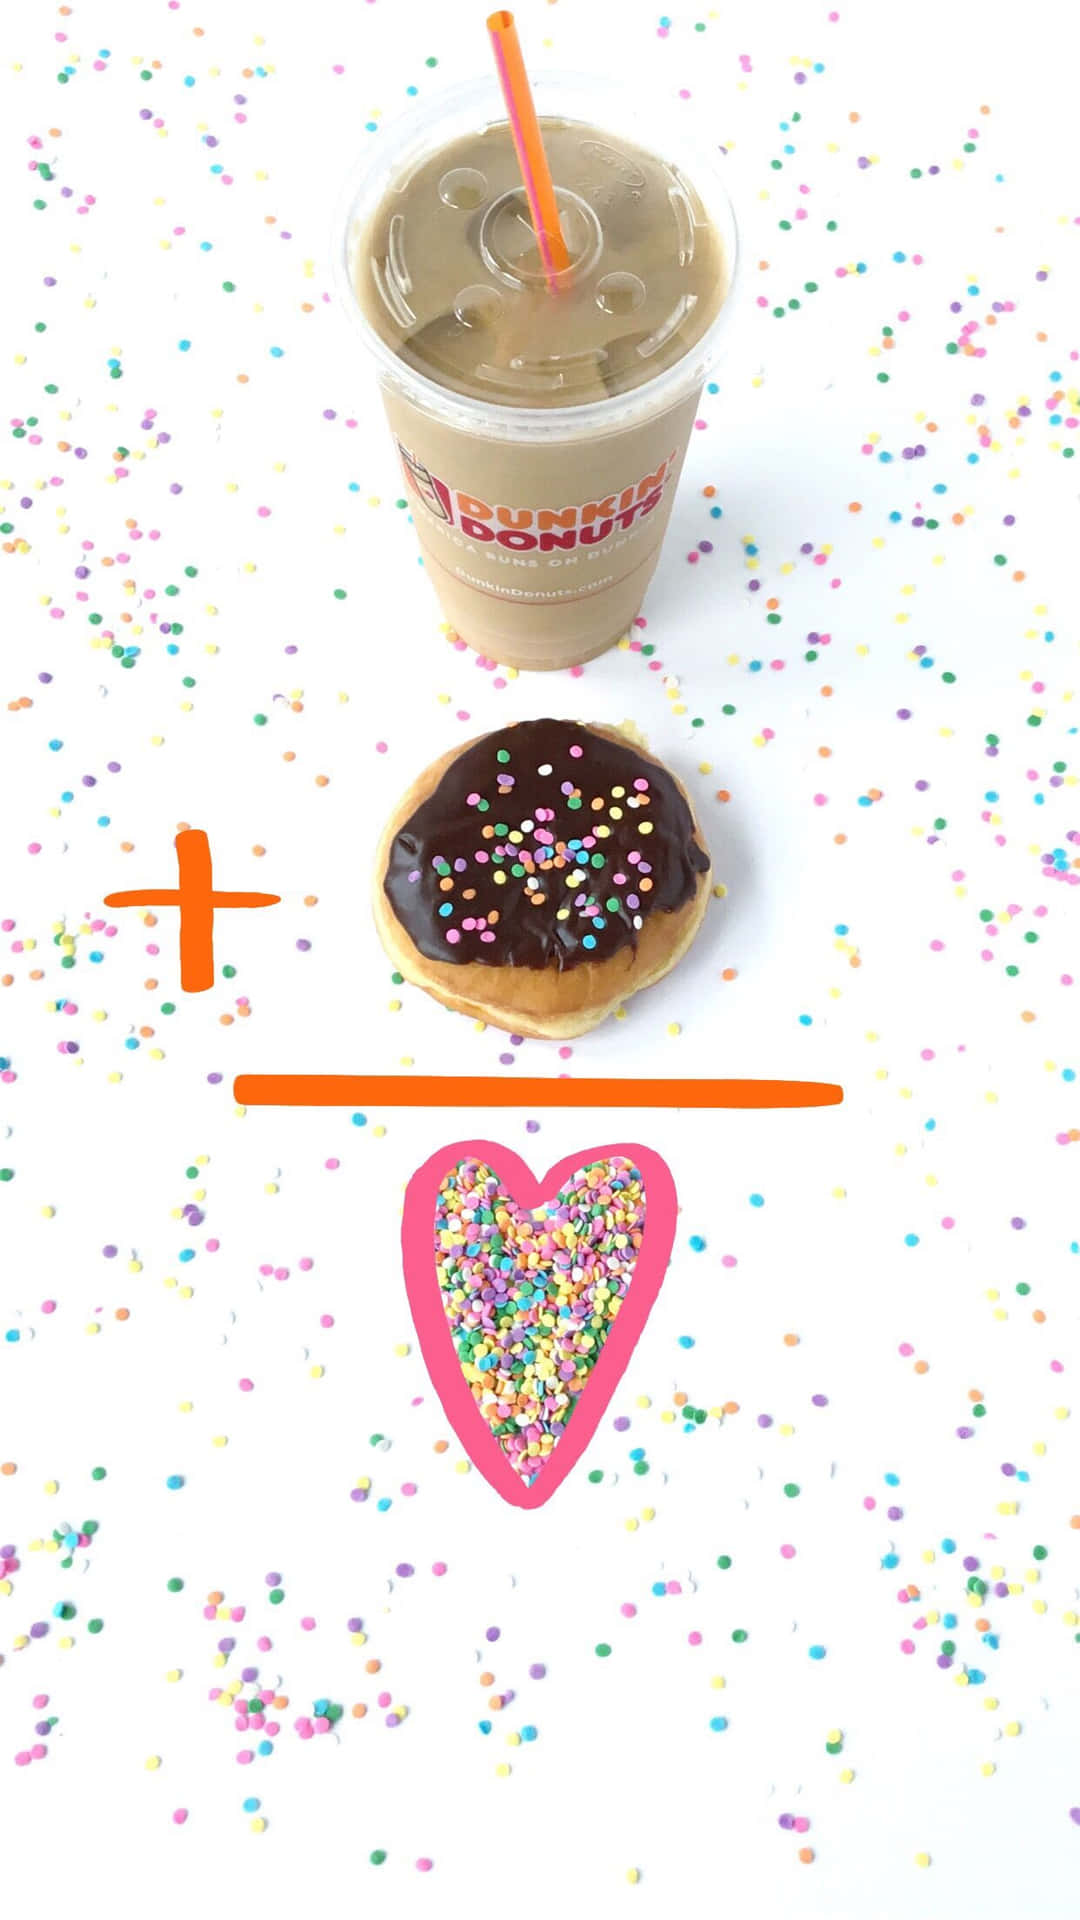 Enjoy the Delicious Taste of Dunkin Donuts